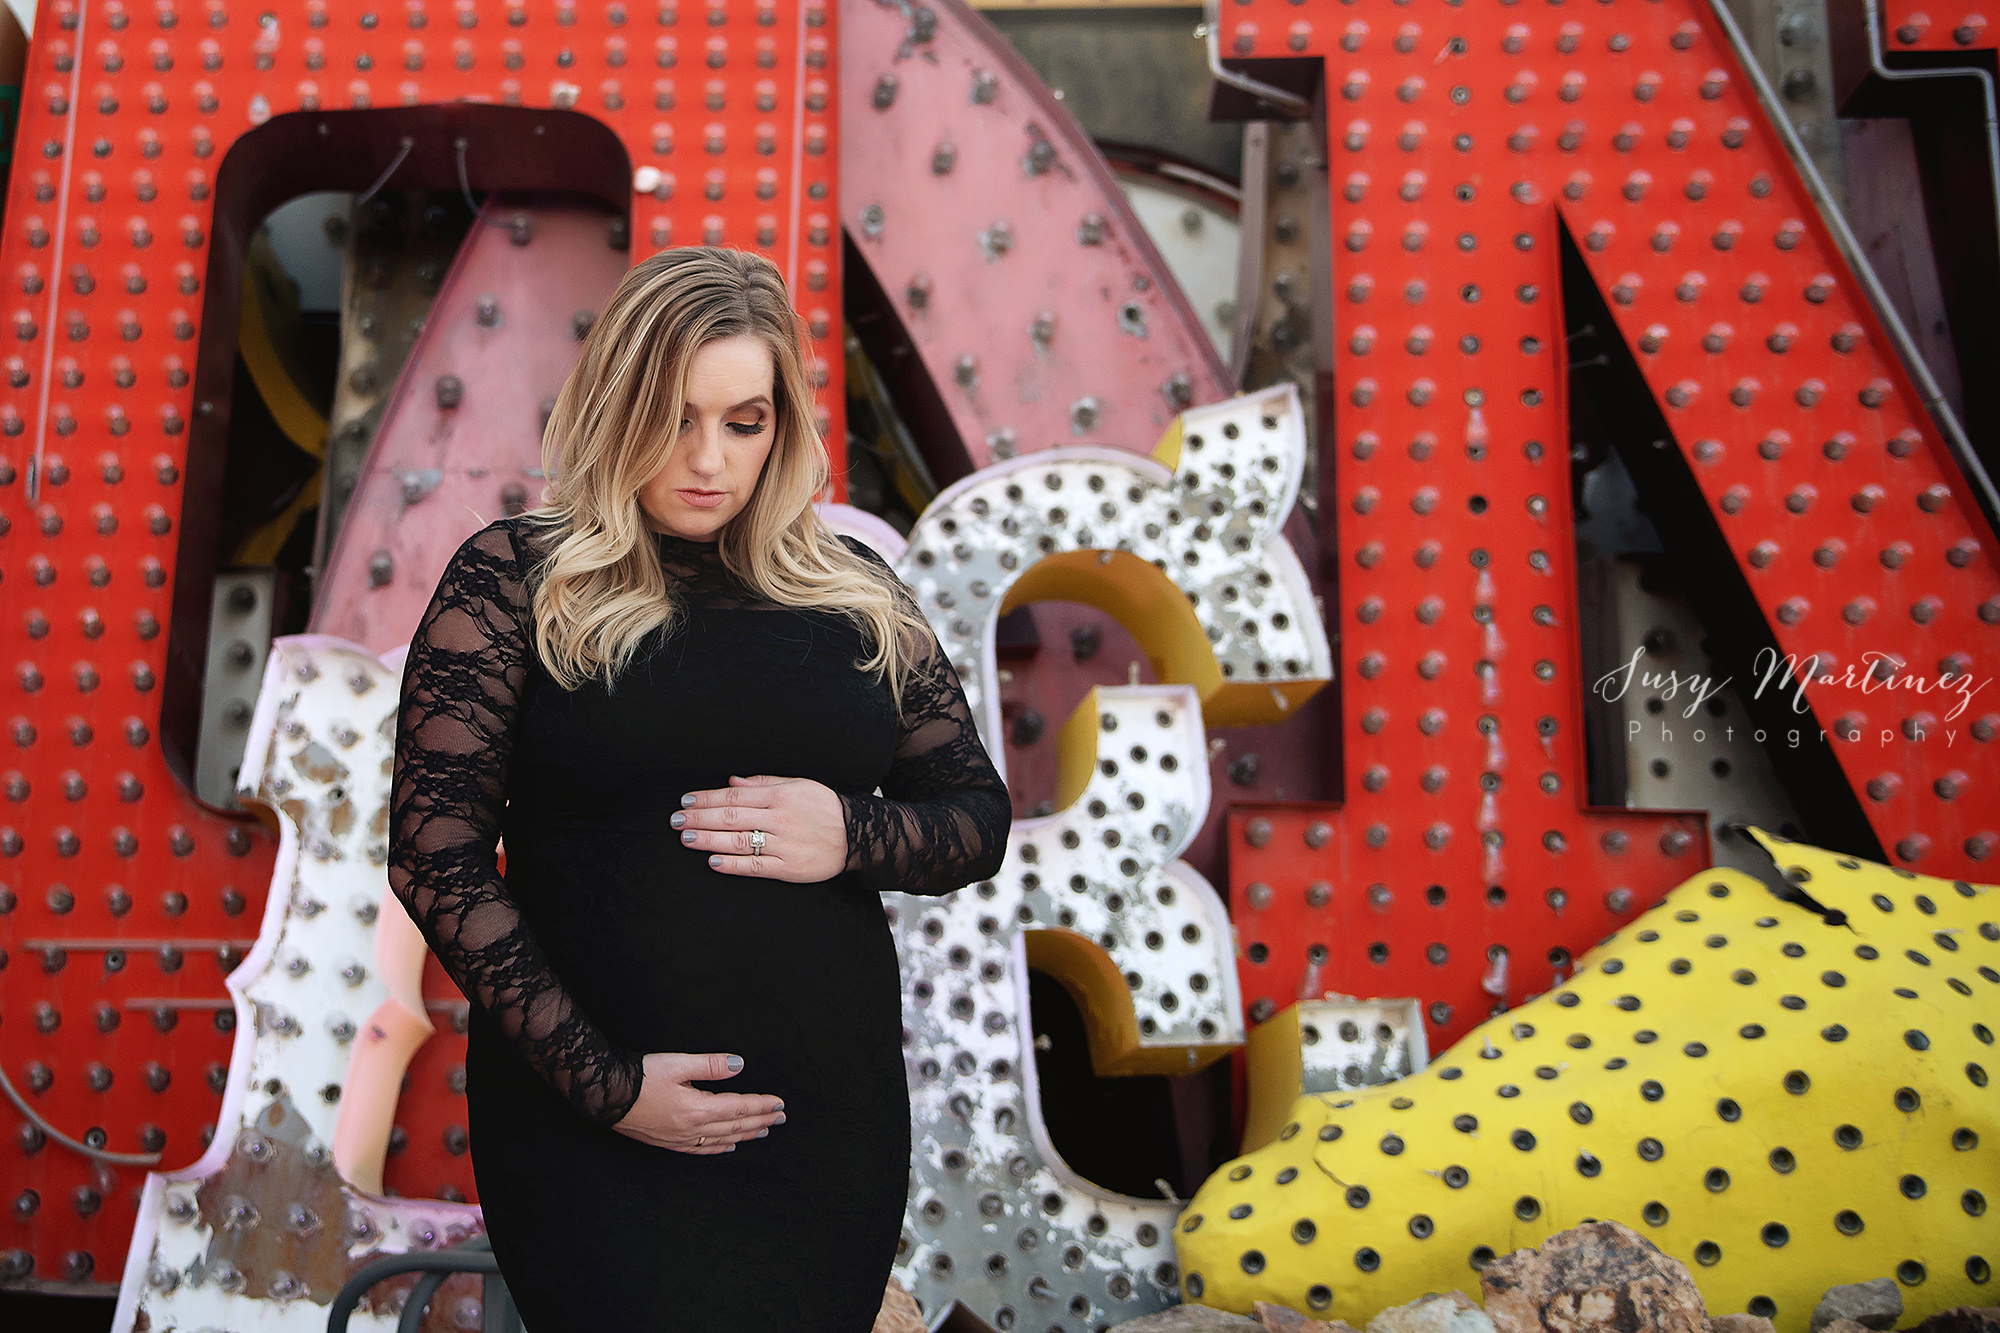 Neon Boneyard maternity session with Susy Martinez Photography